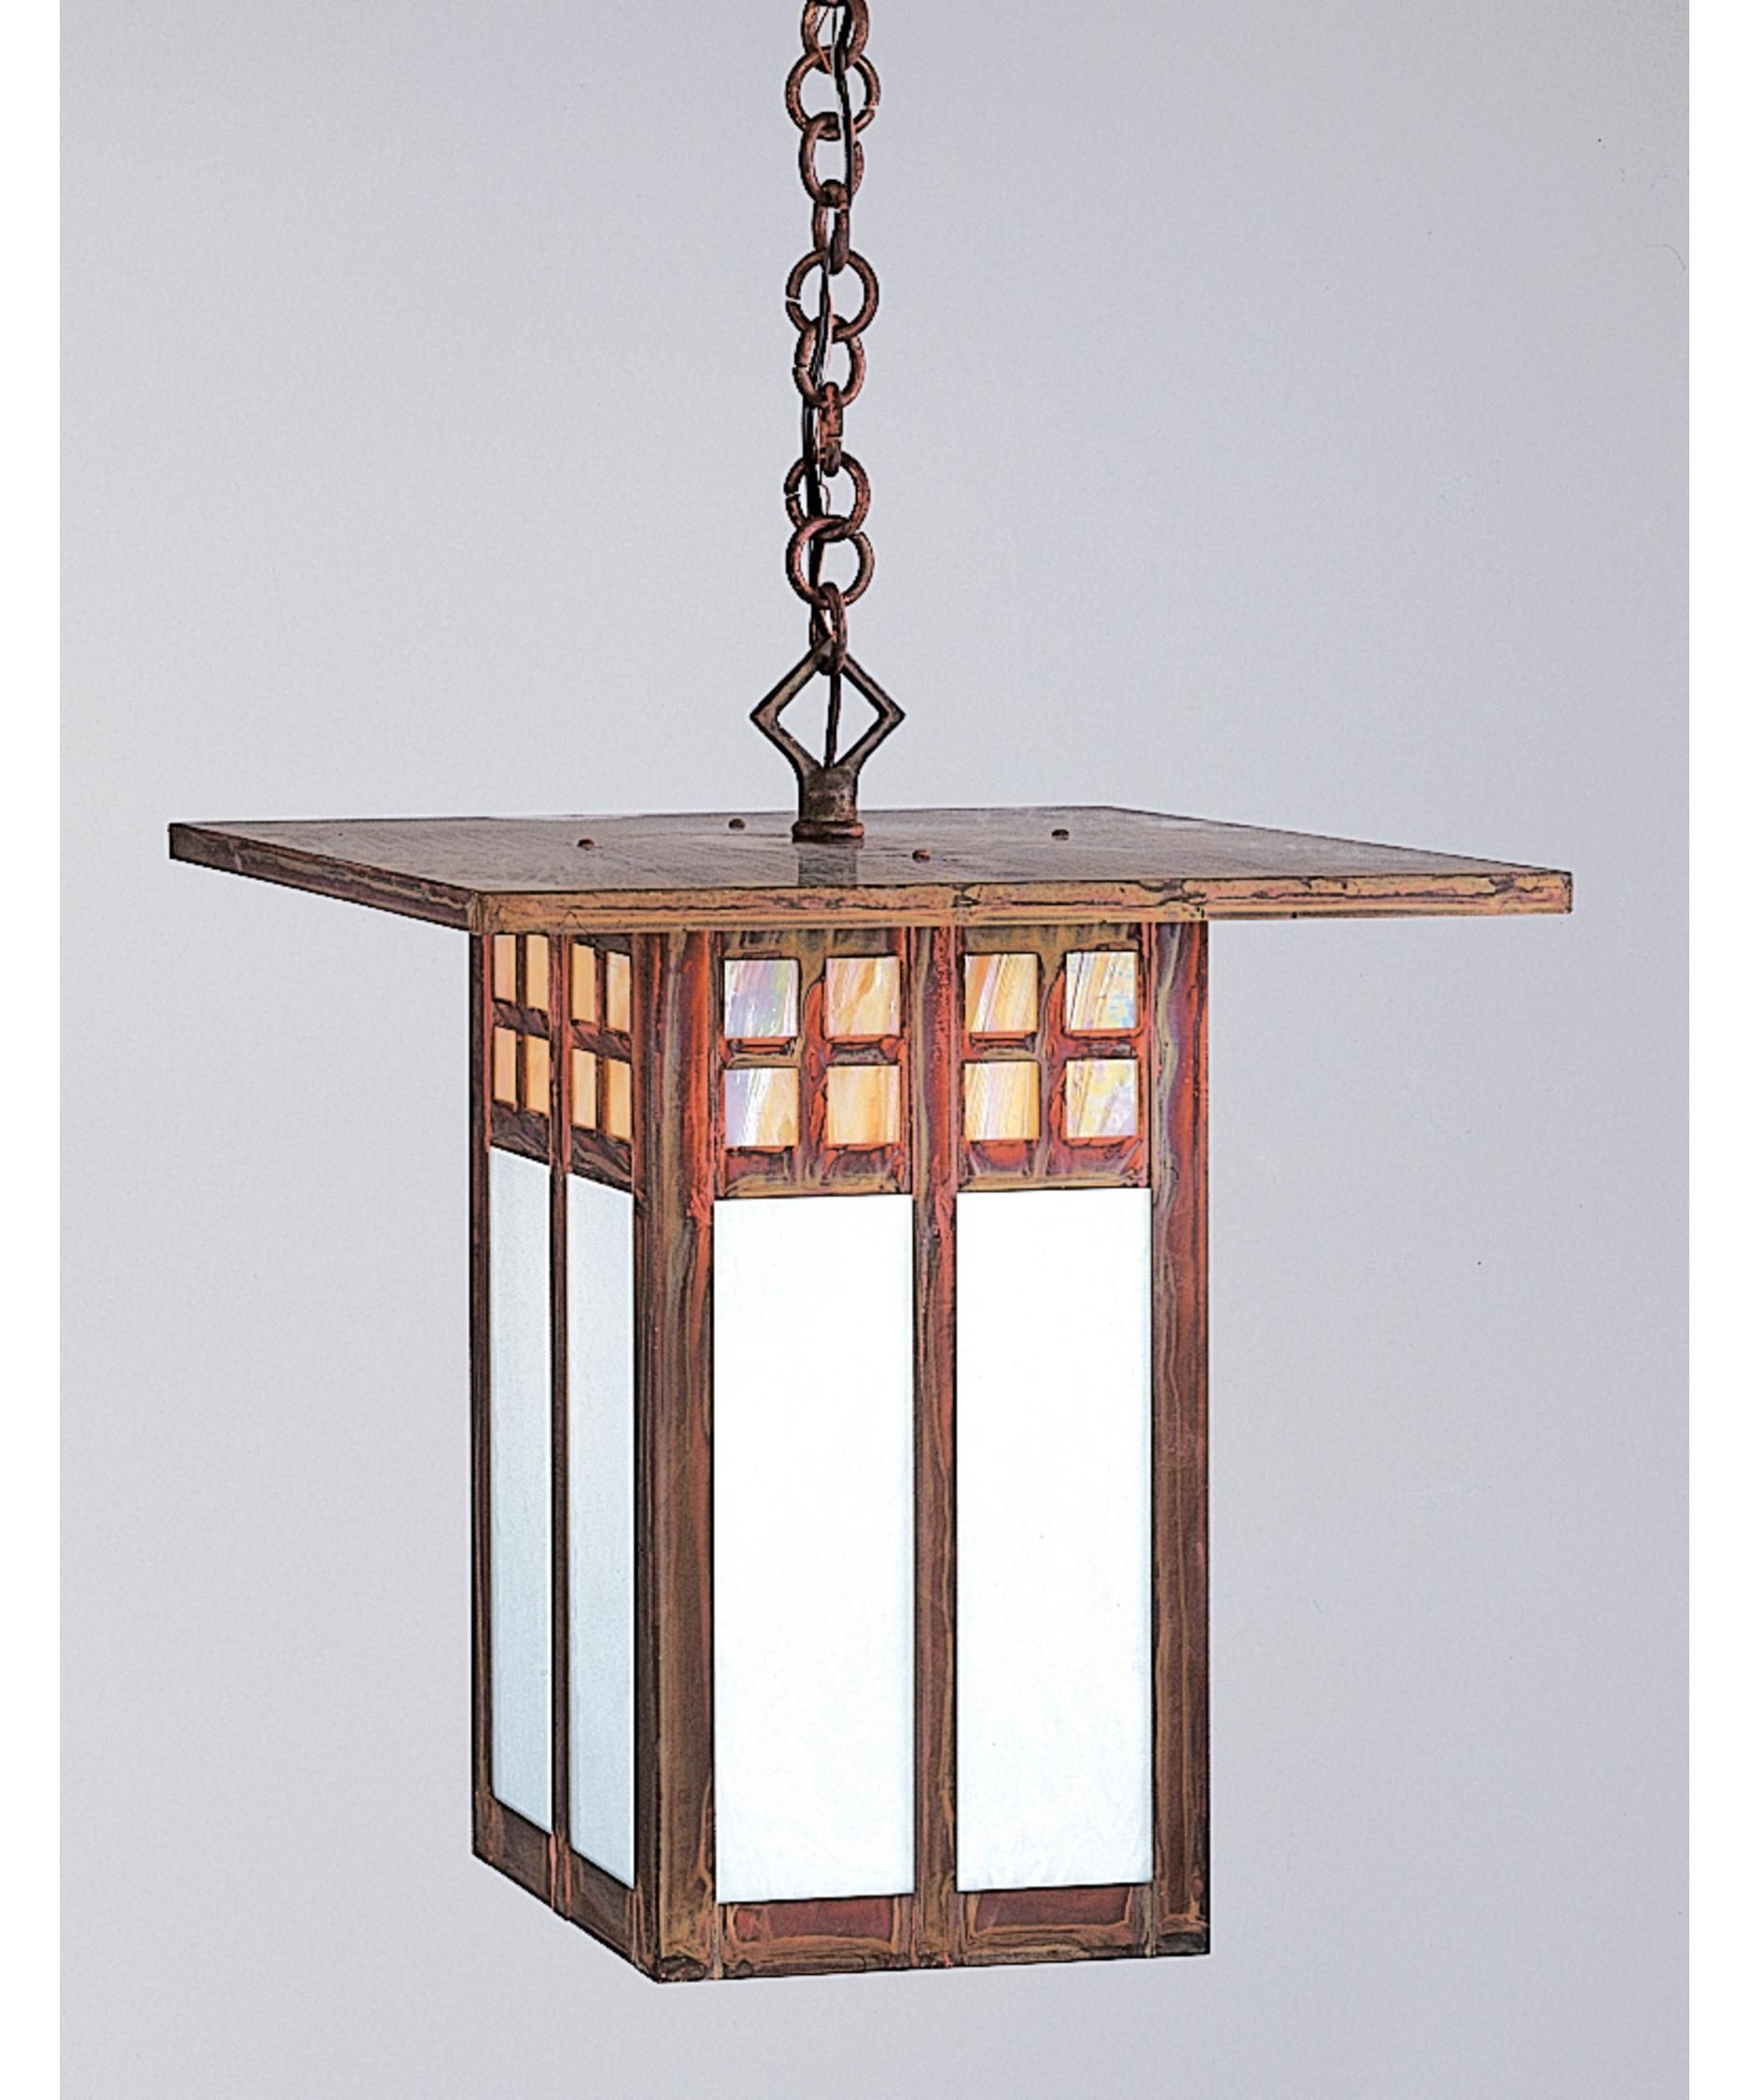 Glasgow 28 Inch Tall 1 Light Outdoor Hanging Lantern | Capitol Lighting |  Outdoor Pendant Lighting, Arroyo Craftsman, Outdoor Pendant For 28 Inch Lantern Chandeliers (View 6 of 15)